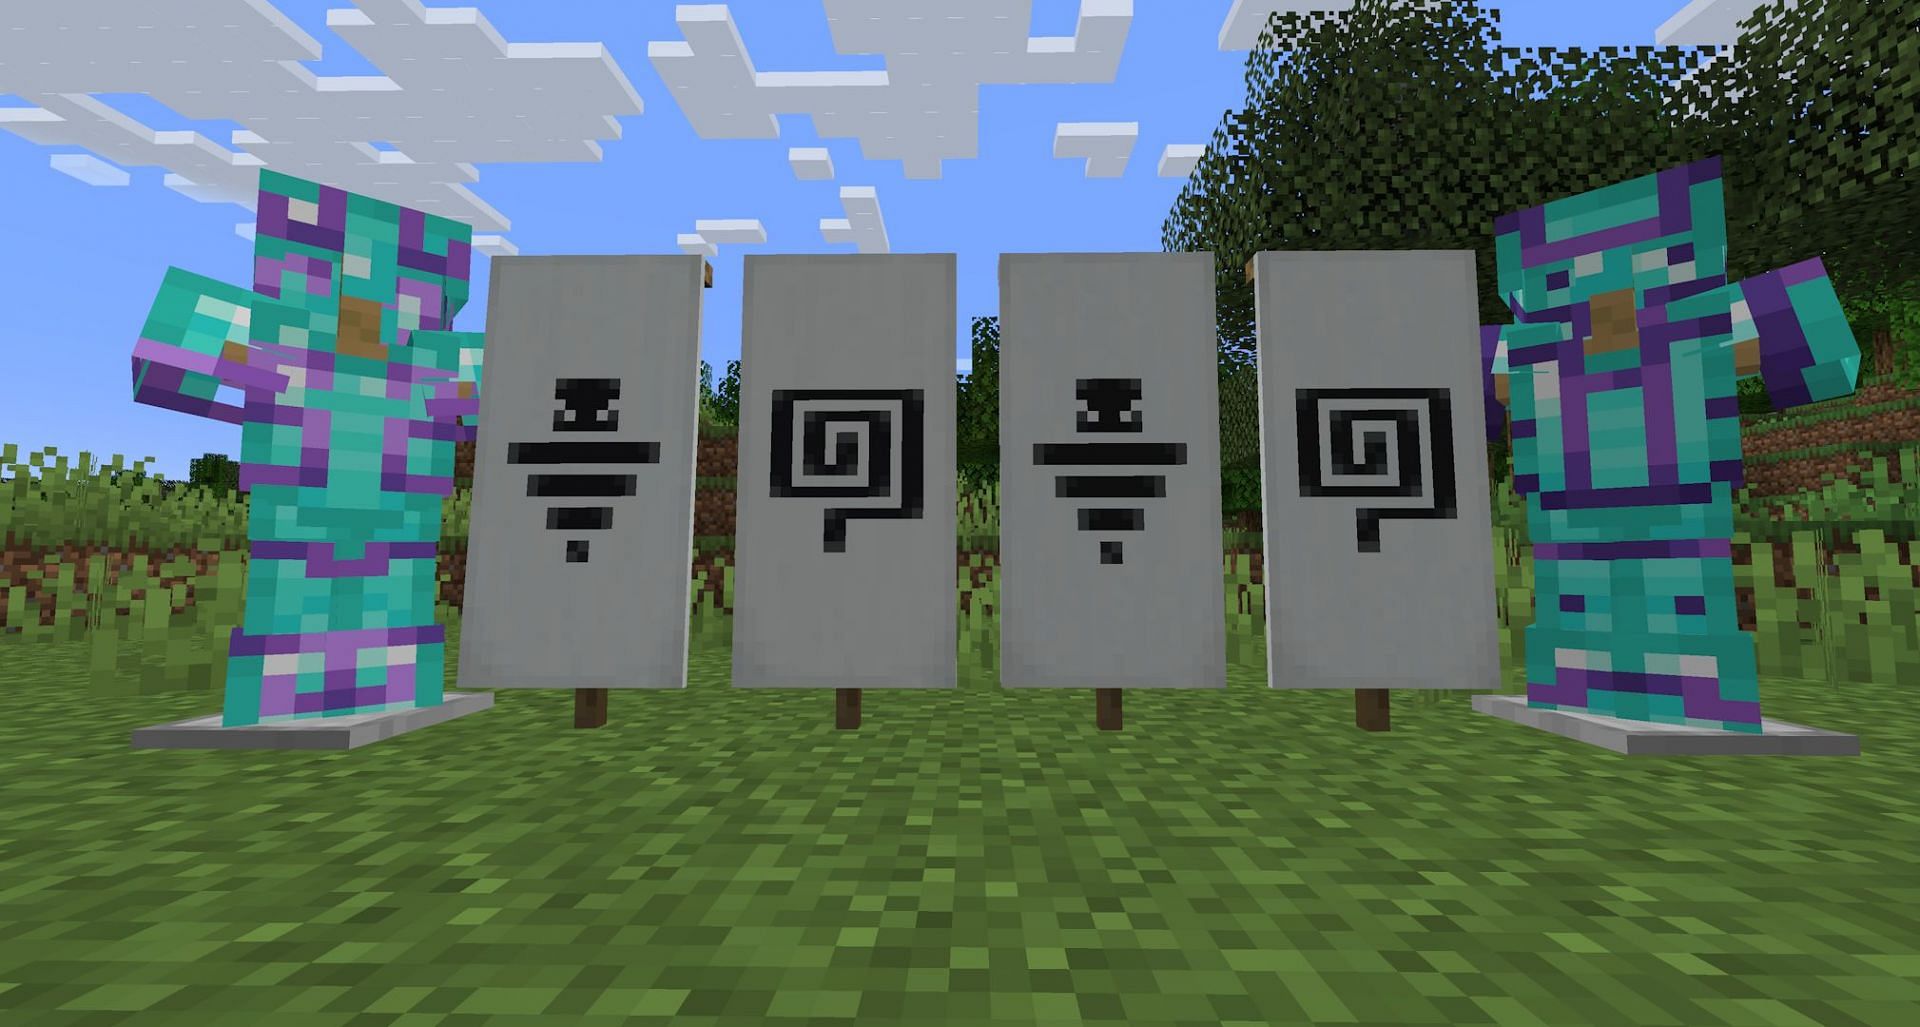 1.20.80 is bringing with it a ton of new decorative experimental content (Image via Mojang)